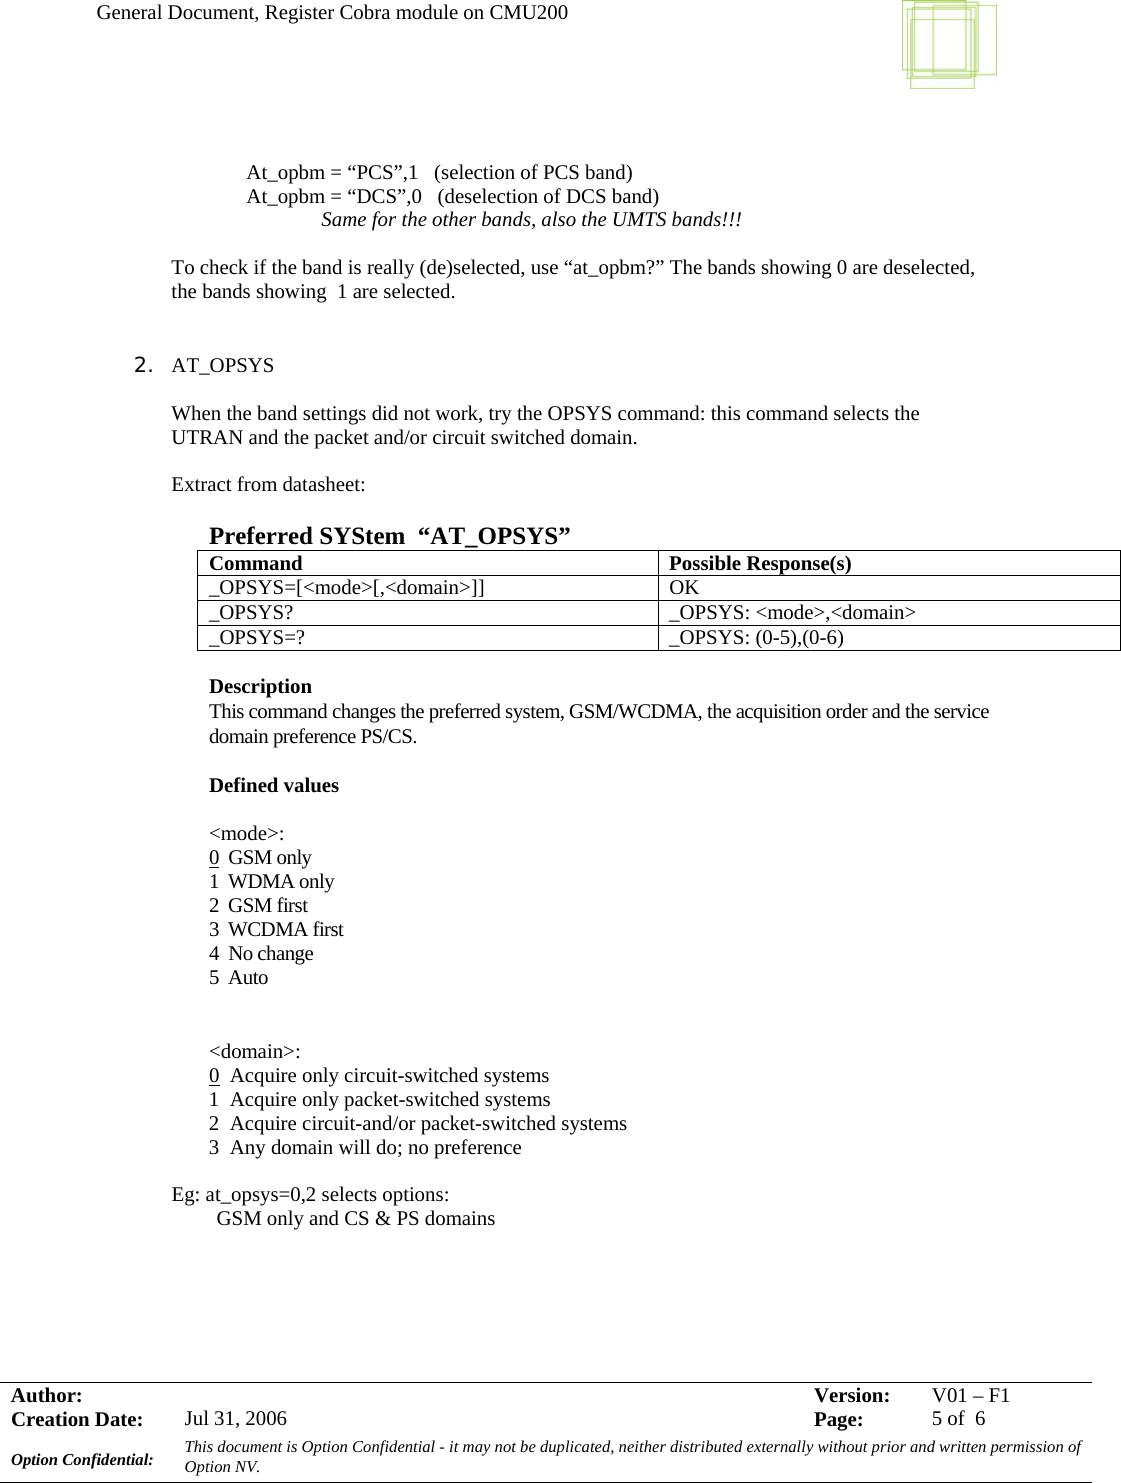 General Document, Register Cobra module on CMU200     Author:     Version:  V01 –F1Creation Date:  Jul 31, 2006    Page:  5 of  6 Option Confidential:  This document is Option Confidential - it may not be duplicated, neither distributed externally without prior and written permission of Option NV.       At_opbm = “PCS”,1   (selection of PCS band)   At_opbm = “DCS”,0   (deselection of DCS band)   Same for the other bands, also the UMTS bands!!!  To check if the band is really (de)selected, use “at_opbm?” The bands showing 0 are deselected, the bands showing  1 are selected.   2. AT_OPSYS  When the band settings did not work, try the OPSYS command: this command selects the UTRAN and the packet and/or circuit switched domain.  Extract from datasheet:  Preferred SYStem  “AT_OPSYS” Command Possible Response(s) _OPSYS=[&lt;mode&gt;[,&lt;domain&gt;]] OK _OPSYS? _OPSYS: &lt;mode&gt;,&lt;domain&gt; _OPSYS=? _OPSYS: (0-5),(0-6)  Description  This command changes the preferred system, GSM/WCDMA, the acquisition order and the service domain preference PS/CS. Defined values  &lt;mode&gt;:  0  GSM only 1  WDMA only 2  GSM first 3  WCDMA first 4  No change 5  Auto  &lt;domain&gt;:  0  Acquire only circuit-switched systems 1  Acquire only packet-switched systems 2  Acquire circuit-and/or packet-switched systems 3  Any domain will do; no preference  Eg: at_opsys=0,2 selects options: GSM only and CS &amp; PS domains    